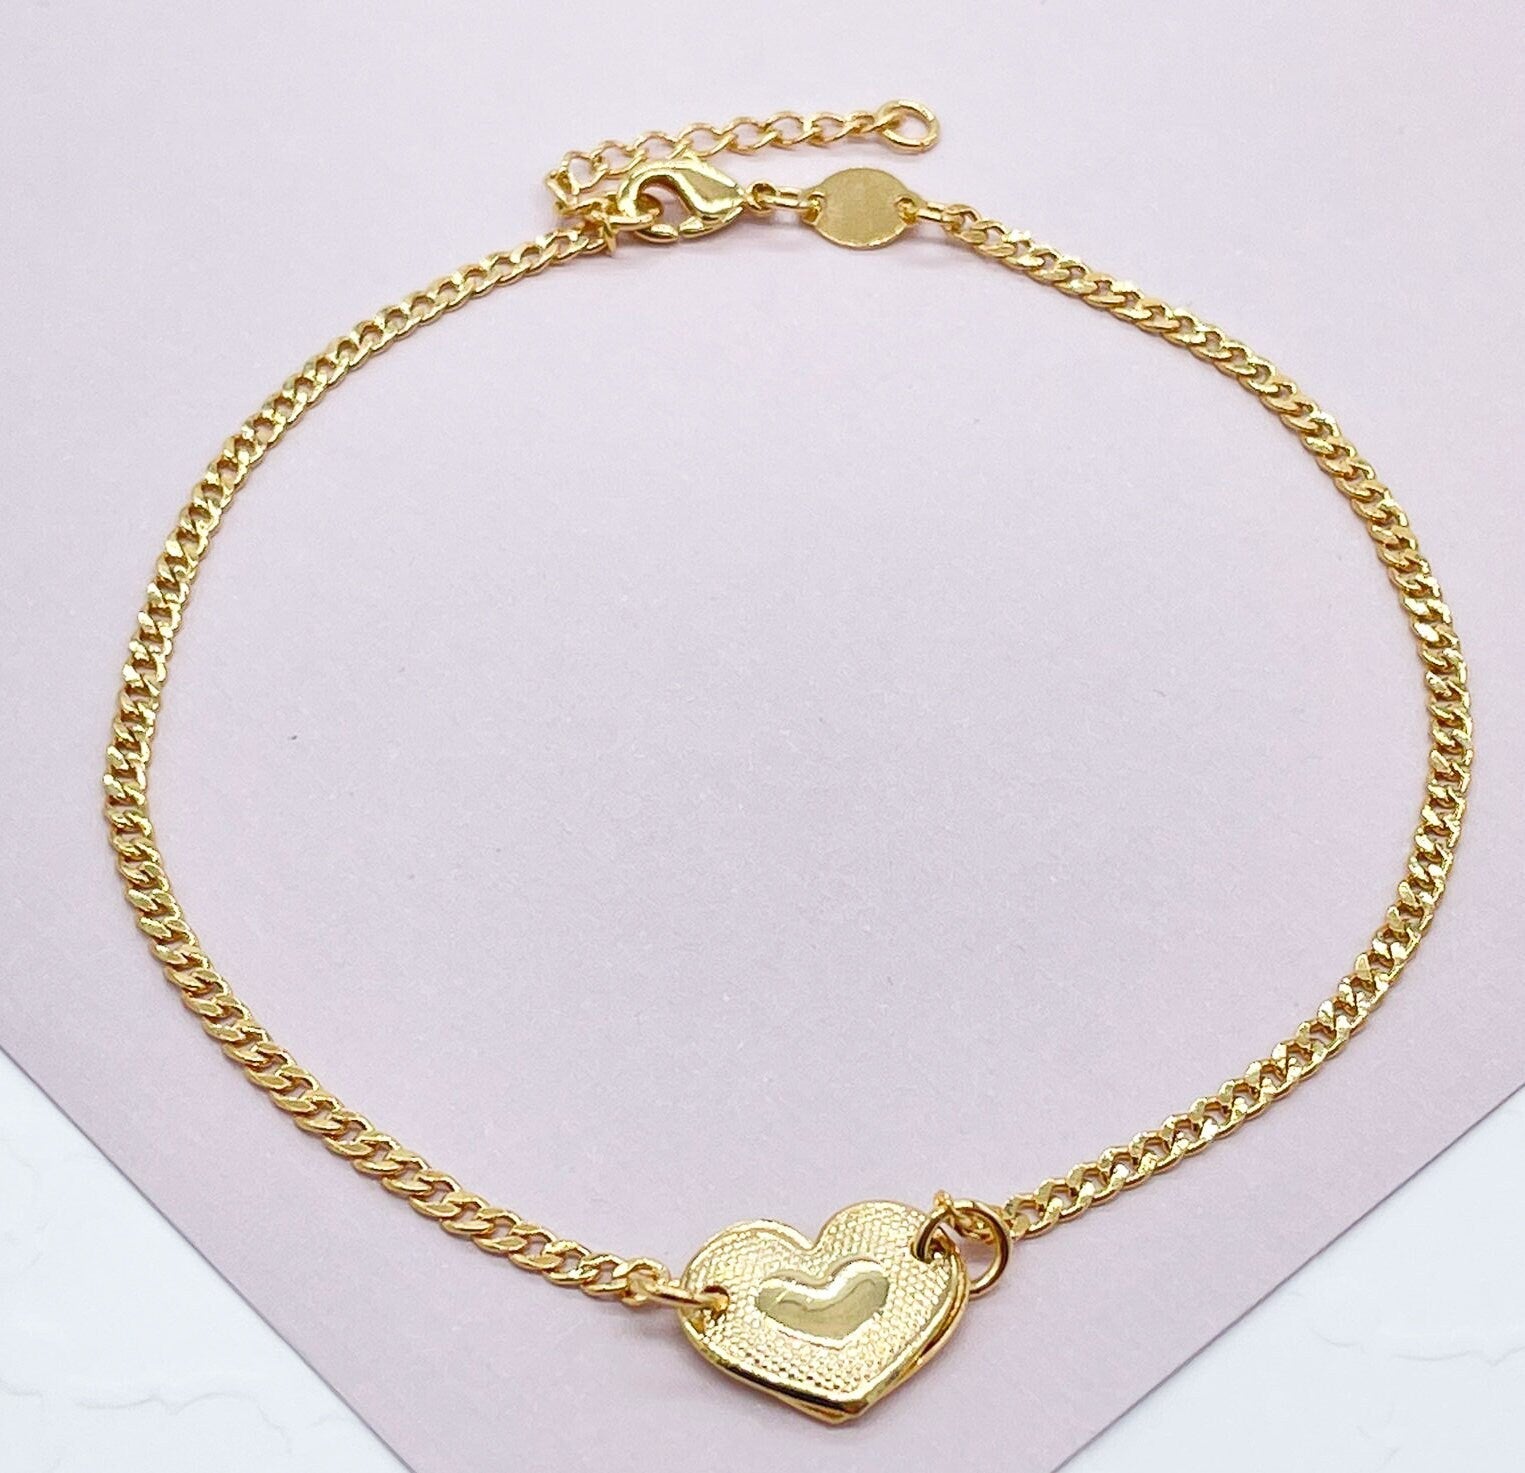 18k Gold Filled Solitaire Cute Puffy Heart Charm Anklet in Curb Chain Featuring Little Delicate Heart in The Middle